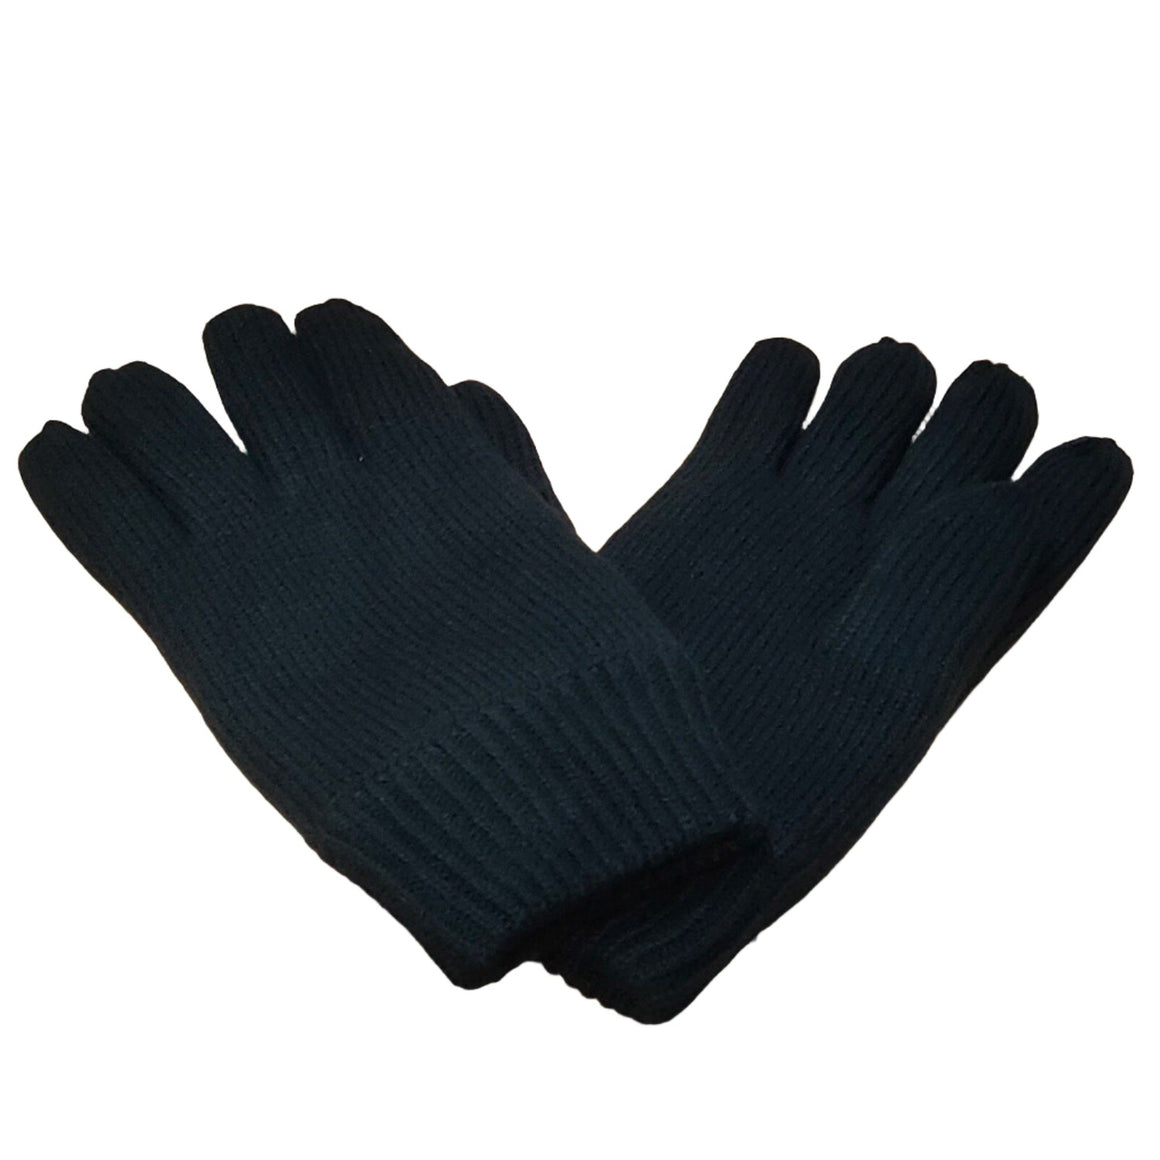 Avenel Acrylic Glove with Thinsulate Lining - Black